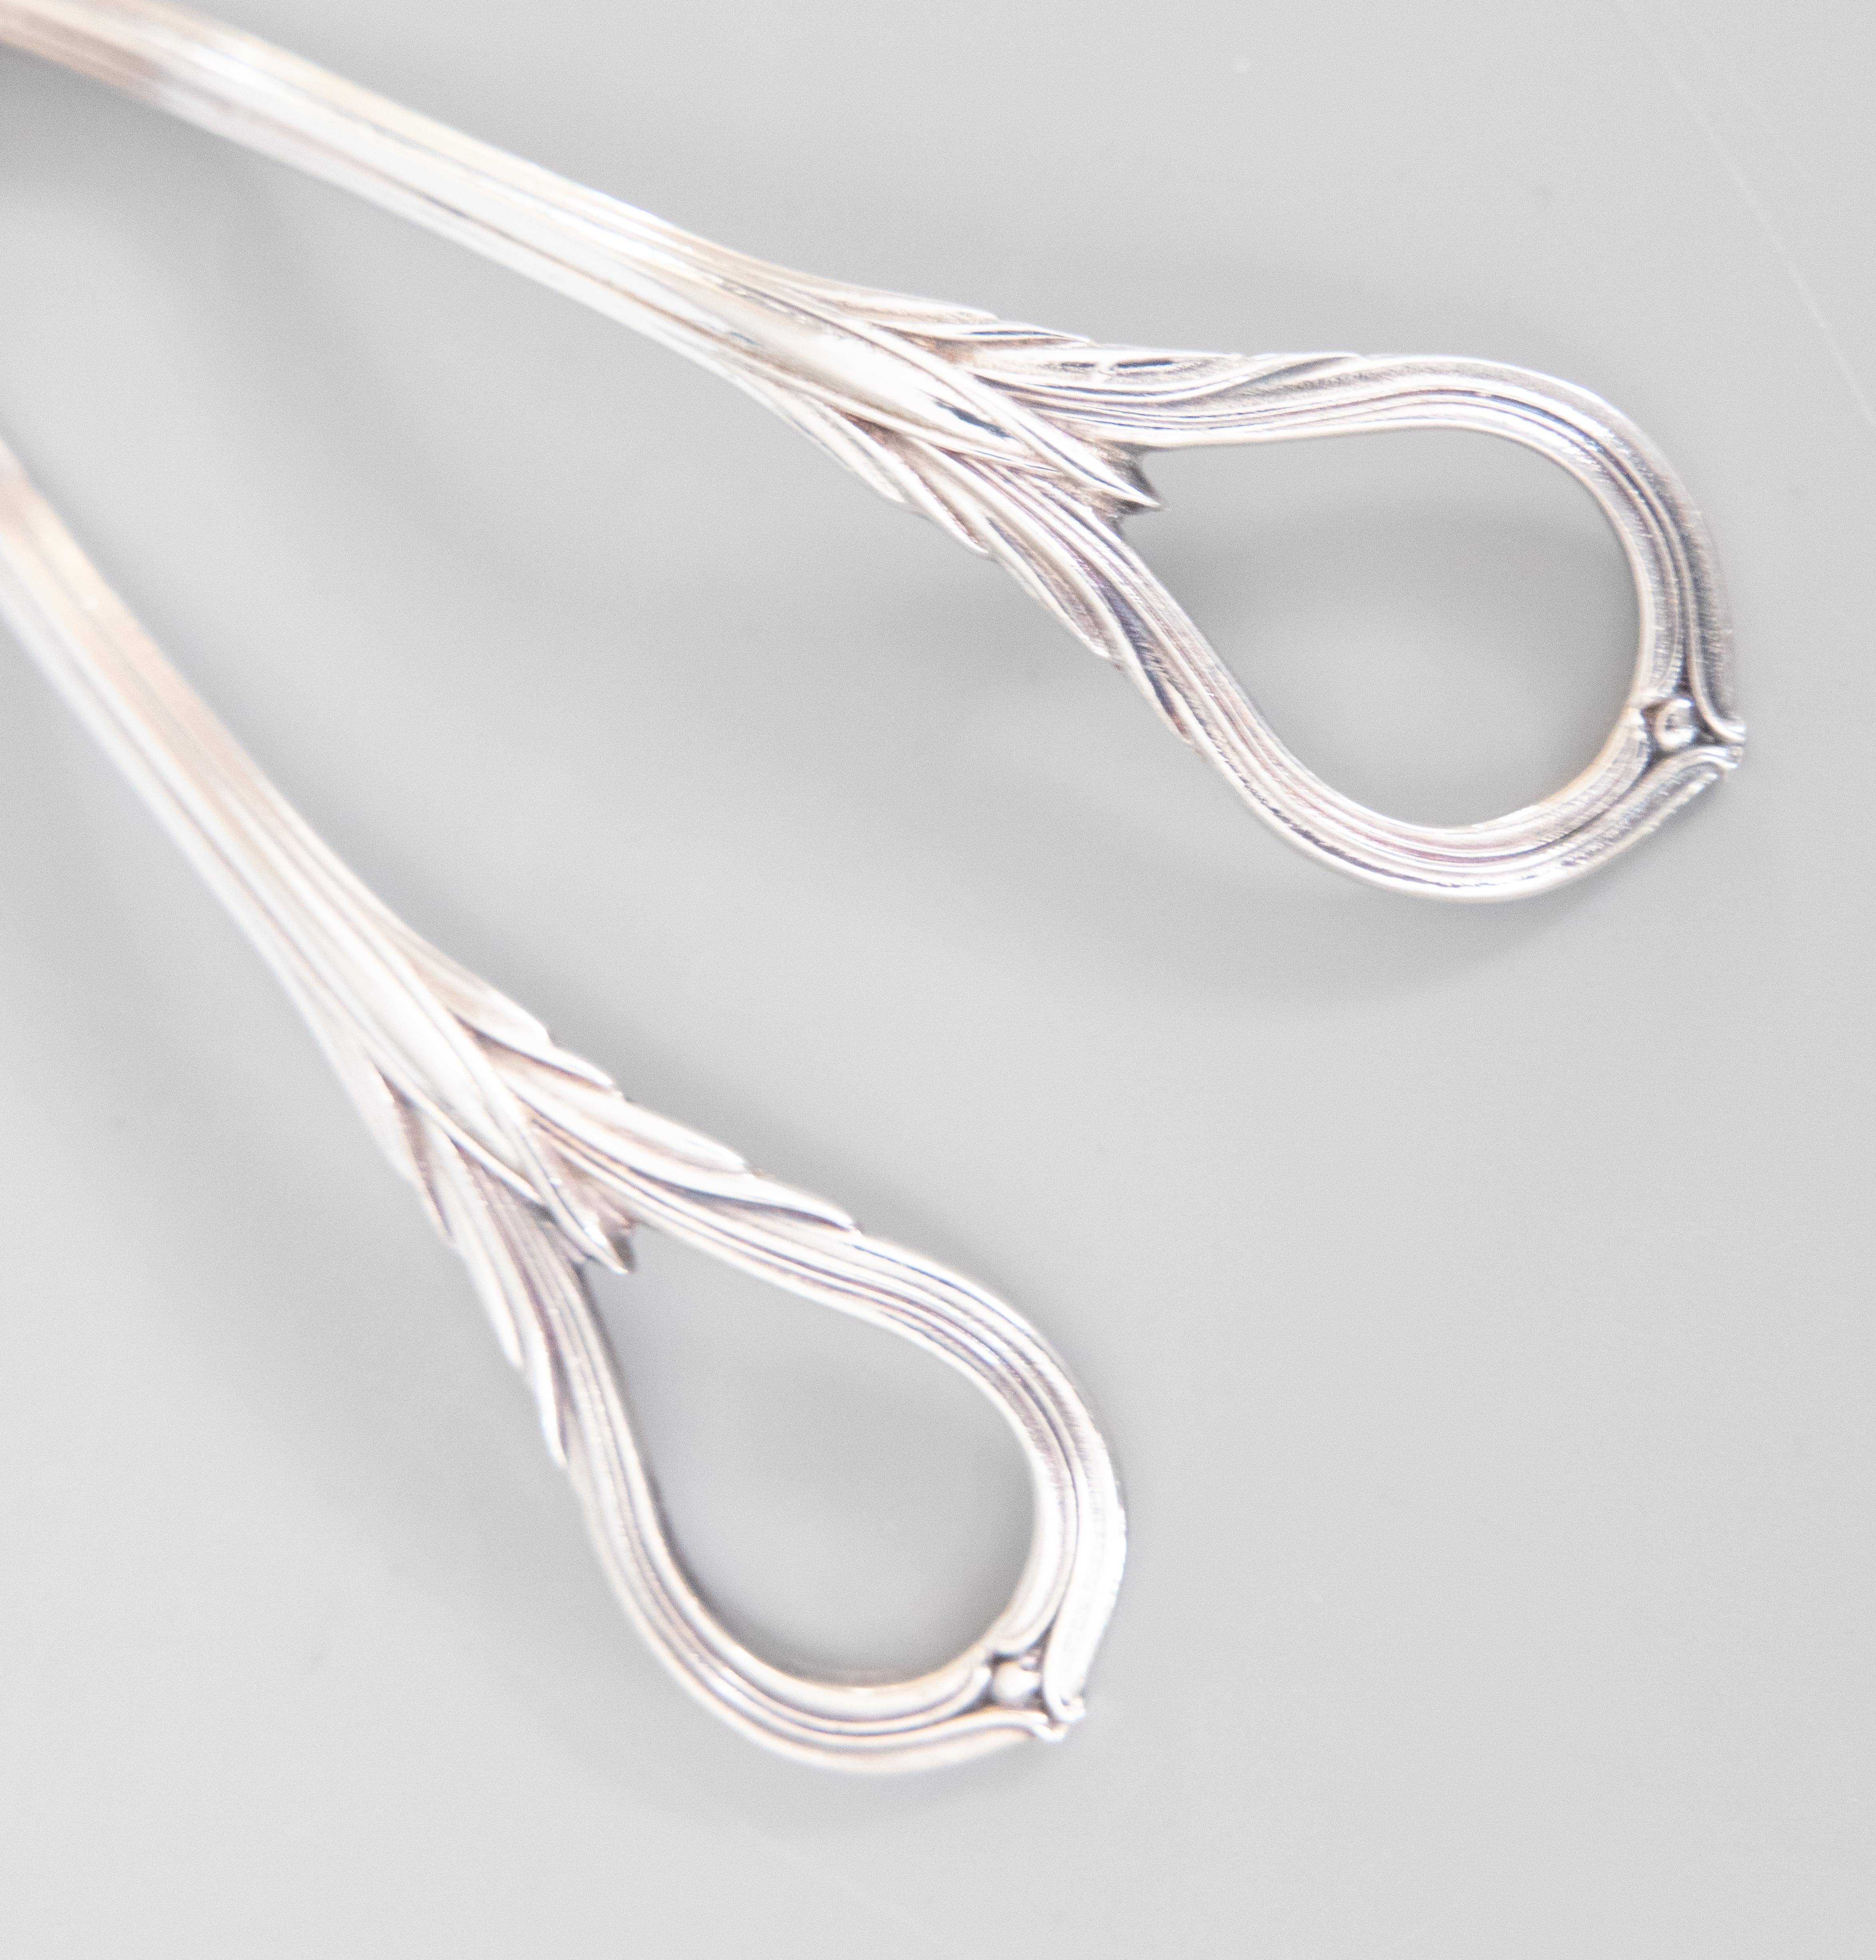 Early 20th Century Art Deco English Silver Plate Grape Shears or Rose Floral Scissors, circa 1920 For Sale